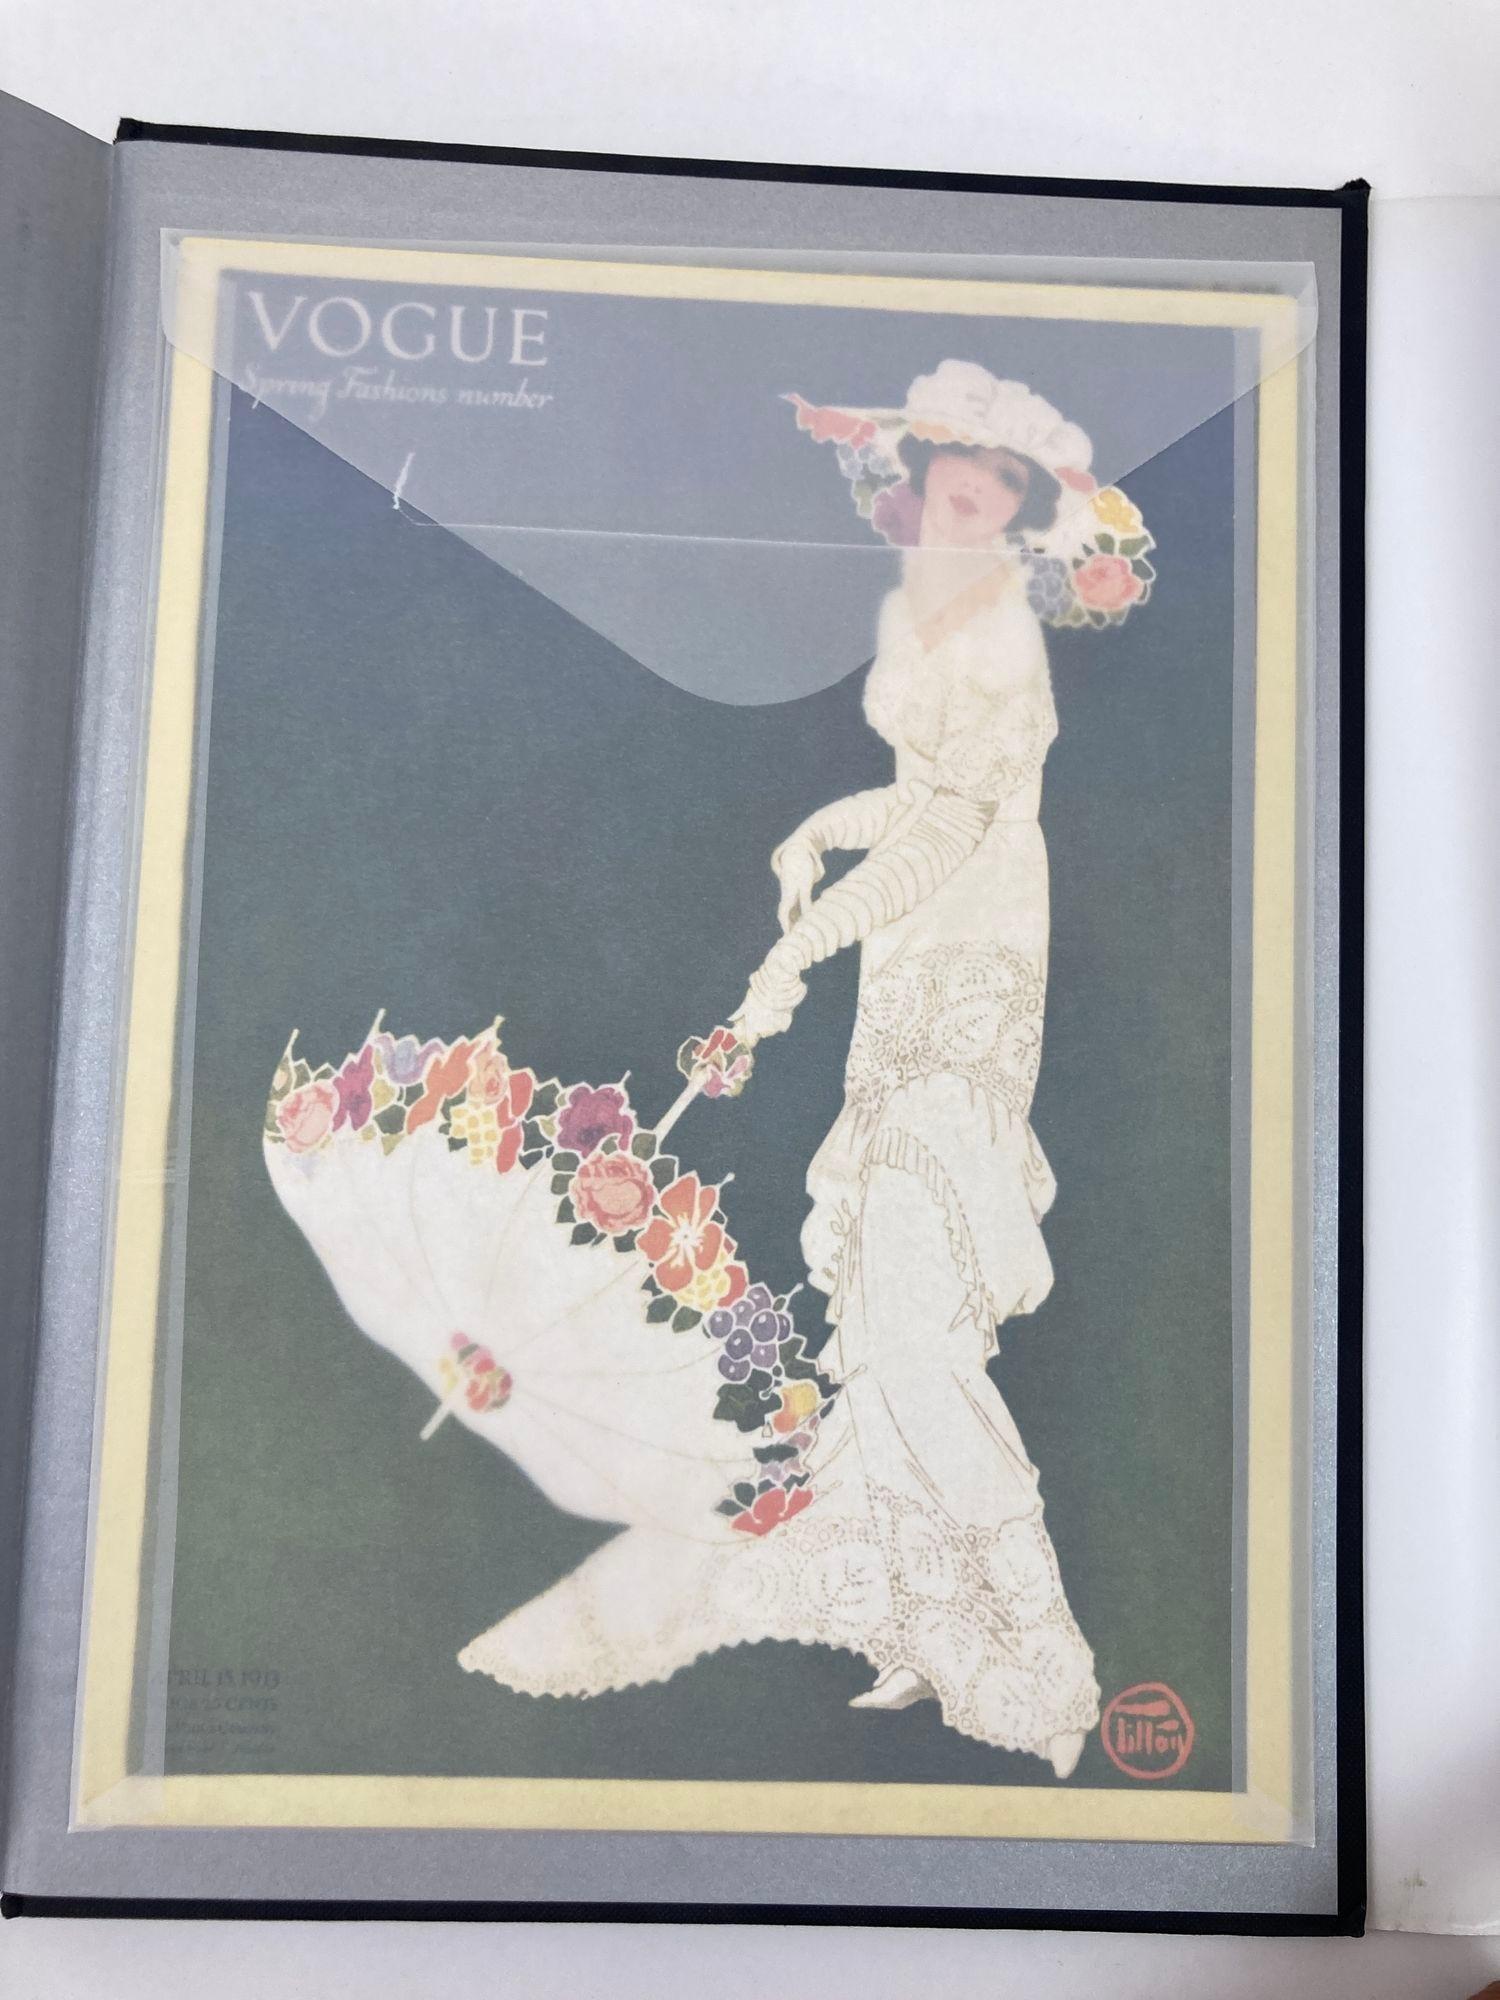 Vogue The Covers Hardcover Coffee Table Book For Sale 8